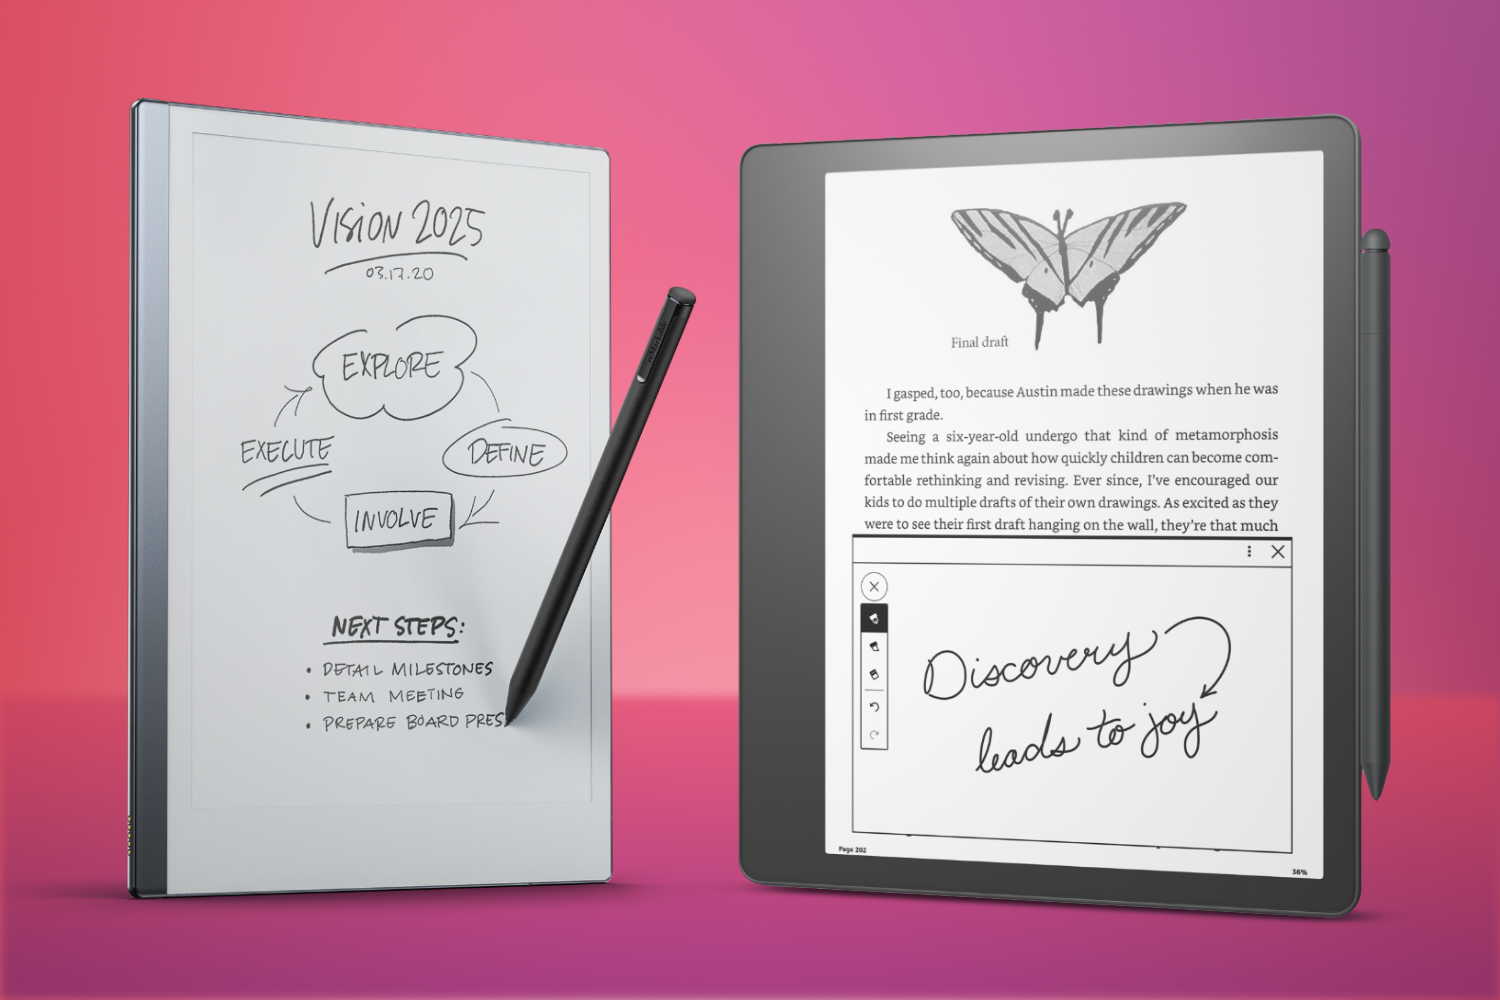 The Kindle Scribe is great, but the Kobo Elipsa 2E is the better